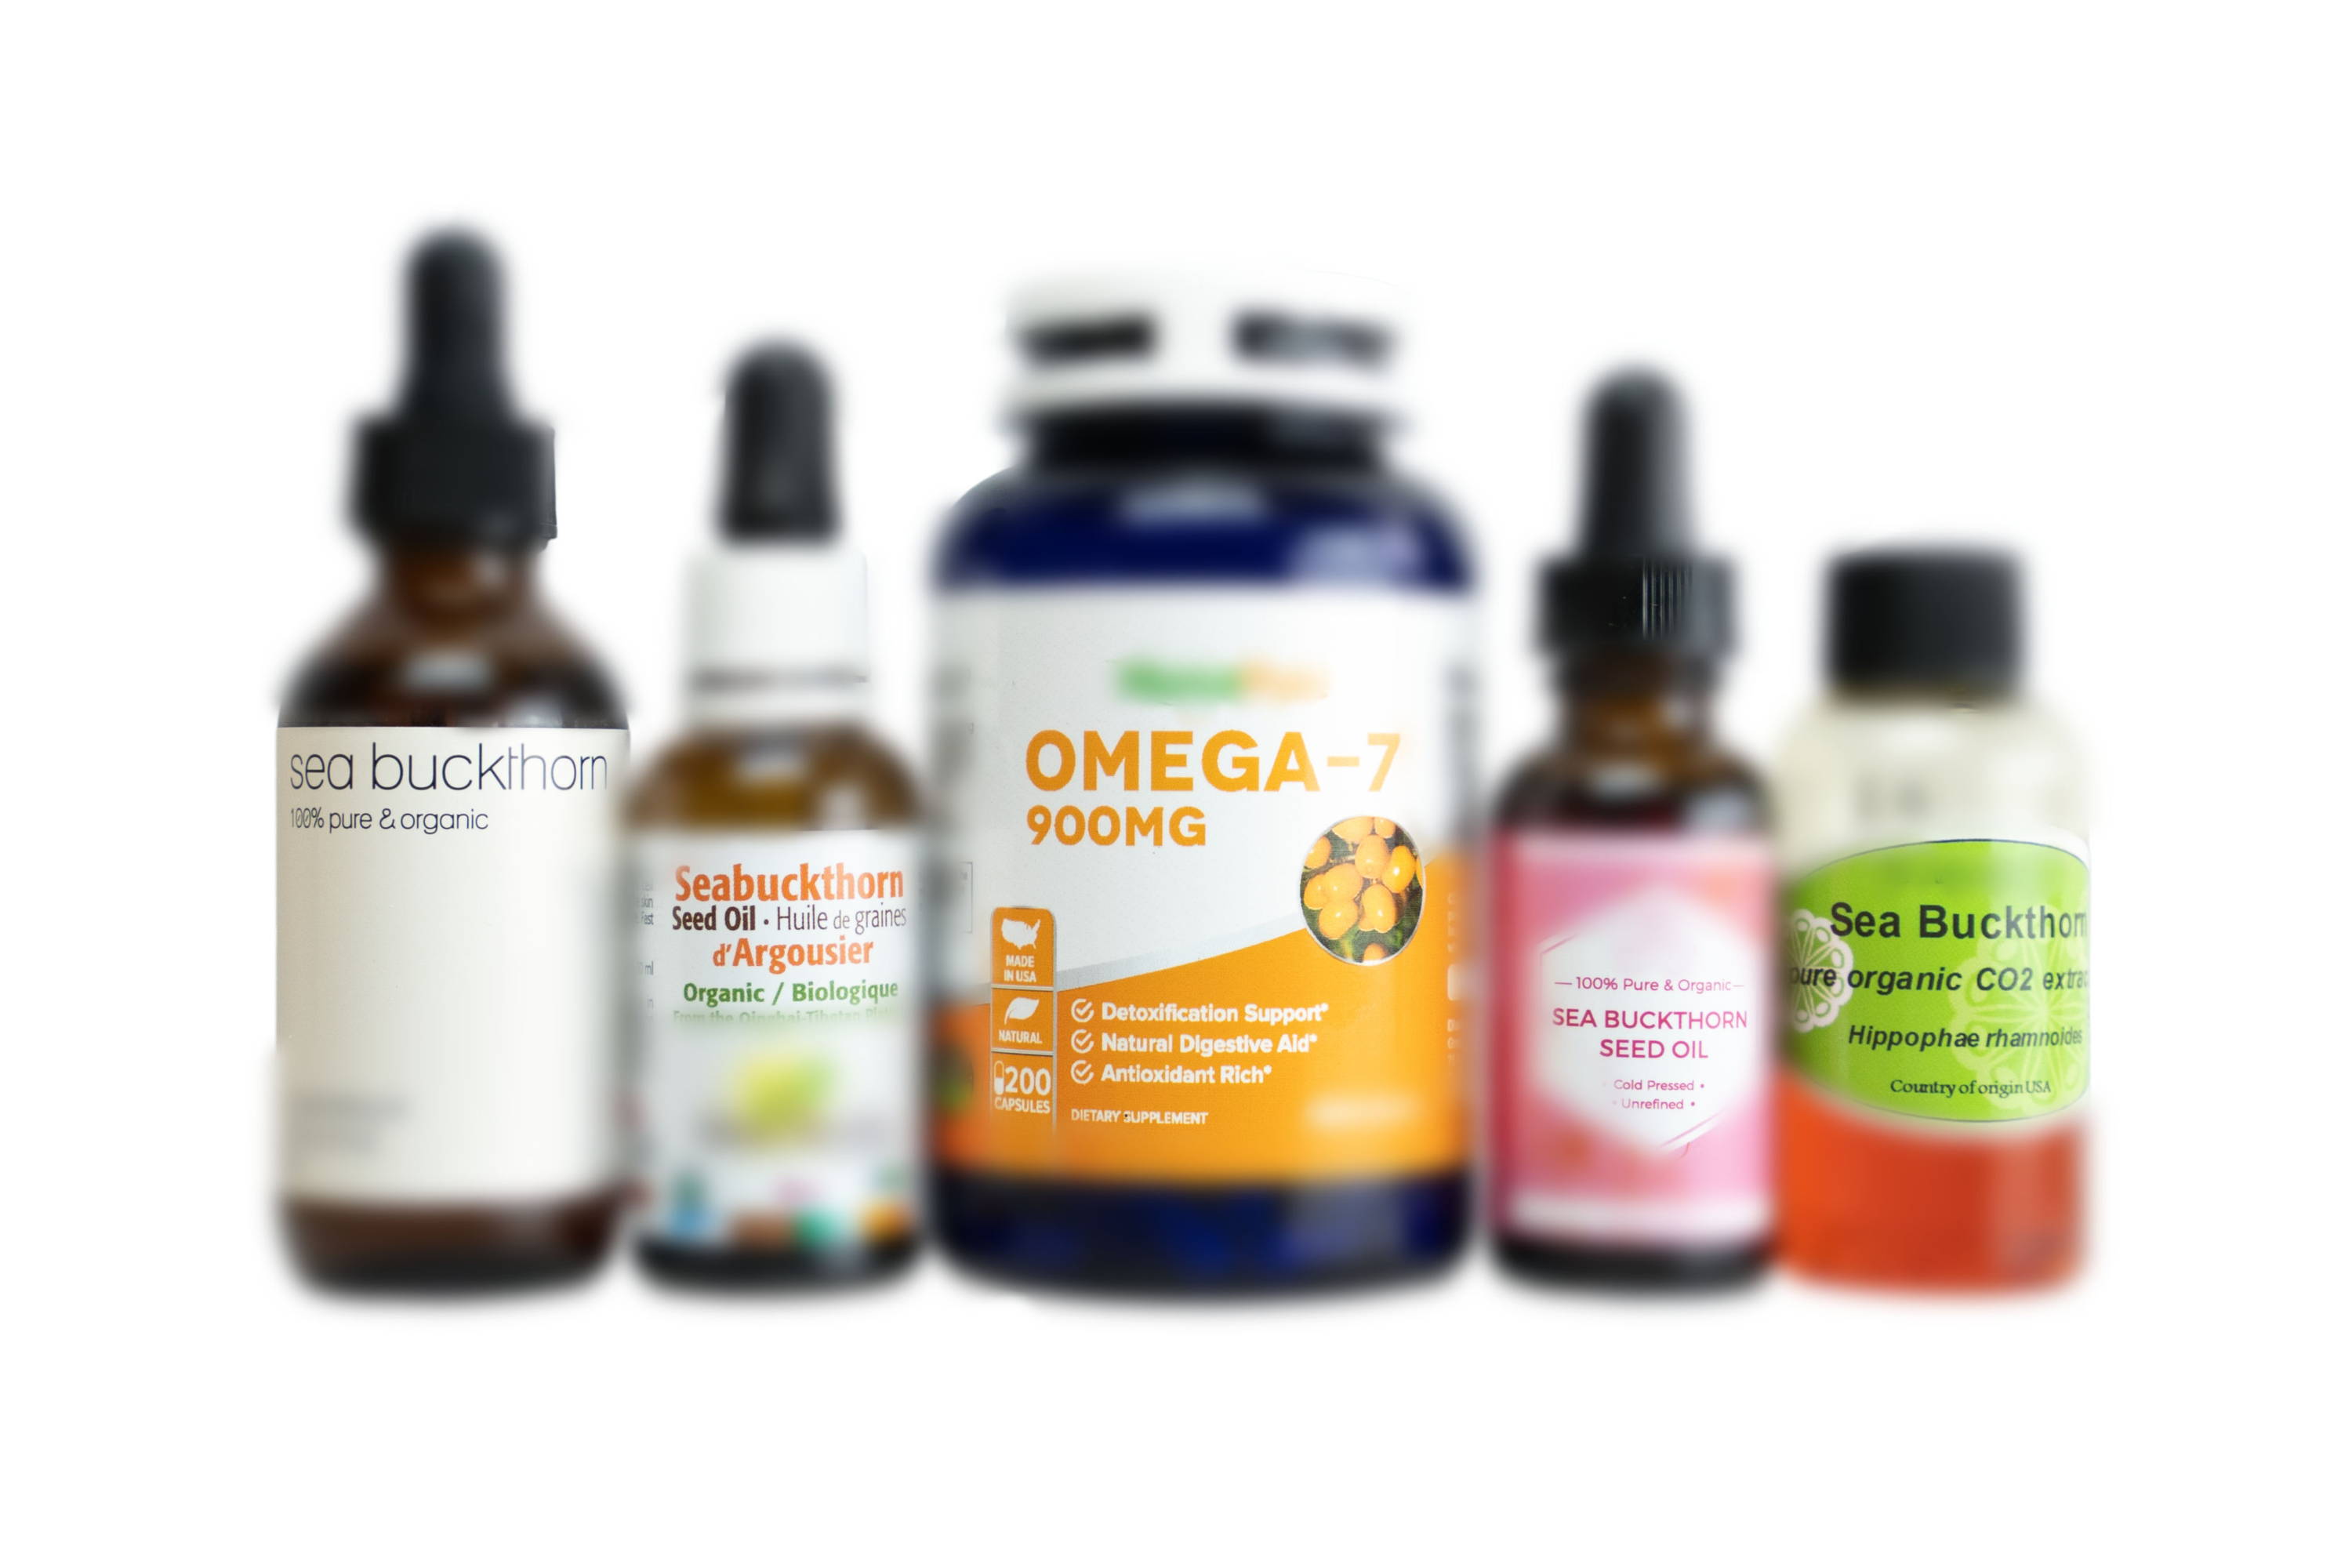 LOW QUALITY OMEGA 7 PRODUCTS